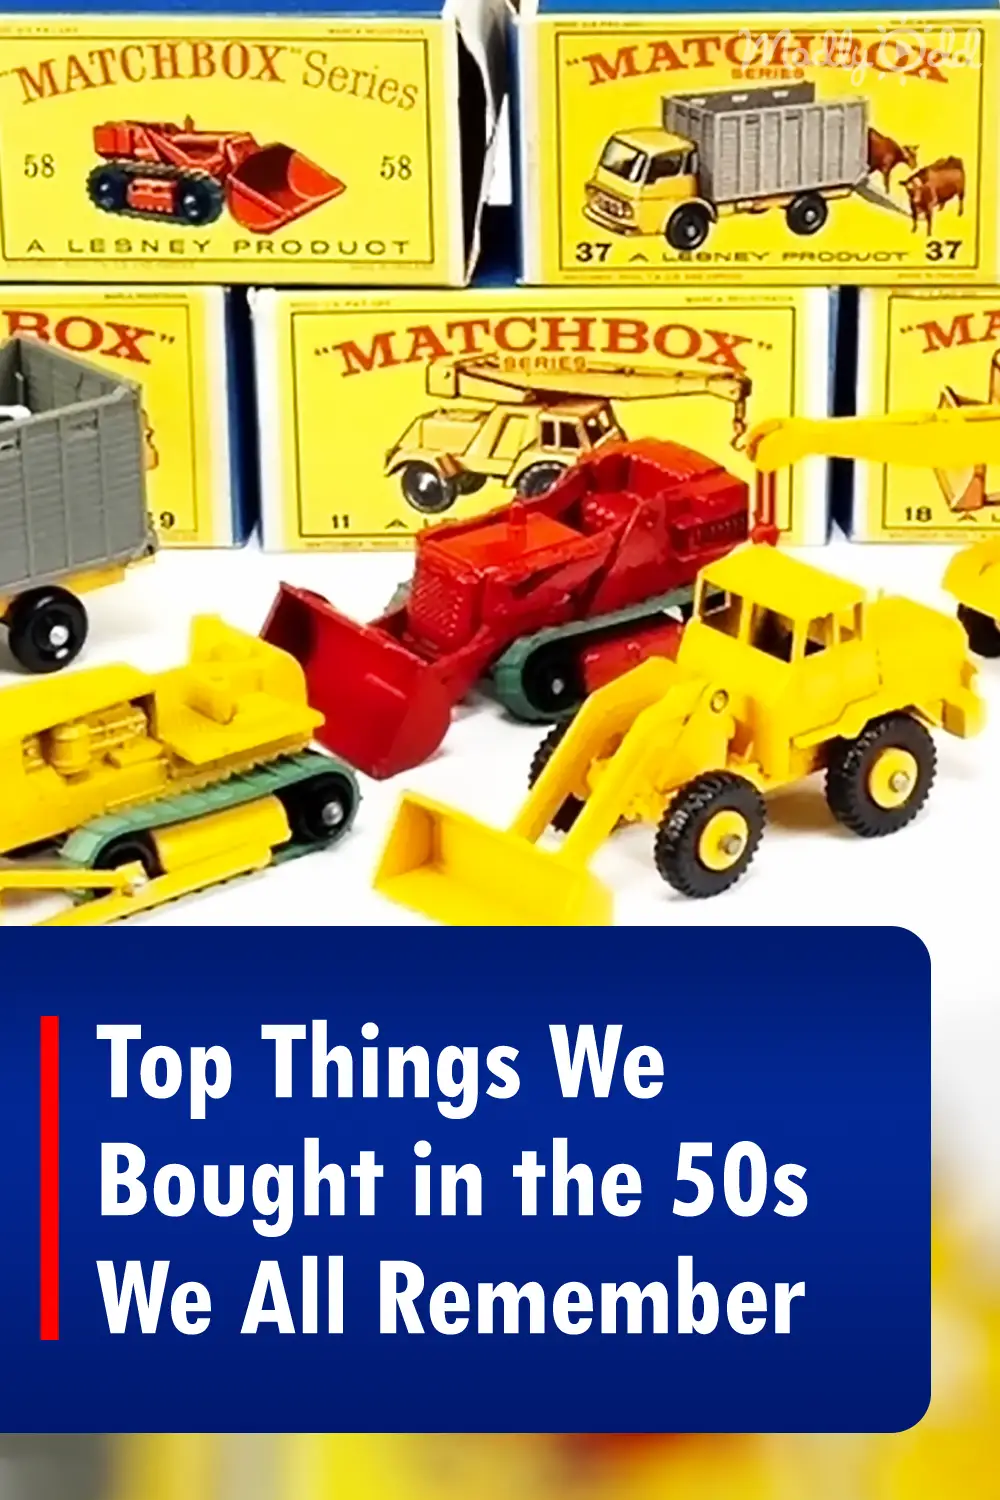 Top Things We Bought in the 50s We All Remember